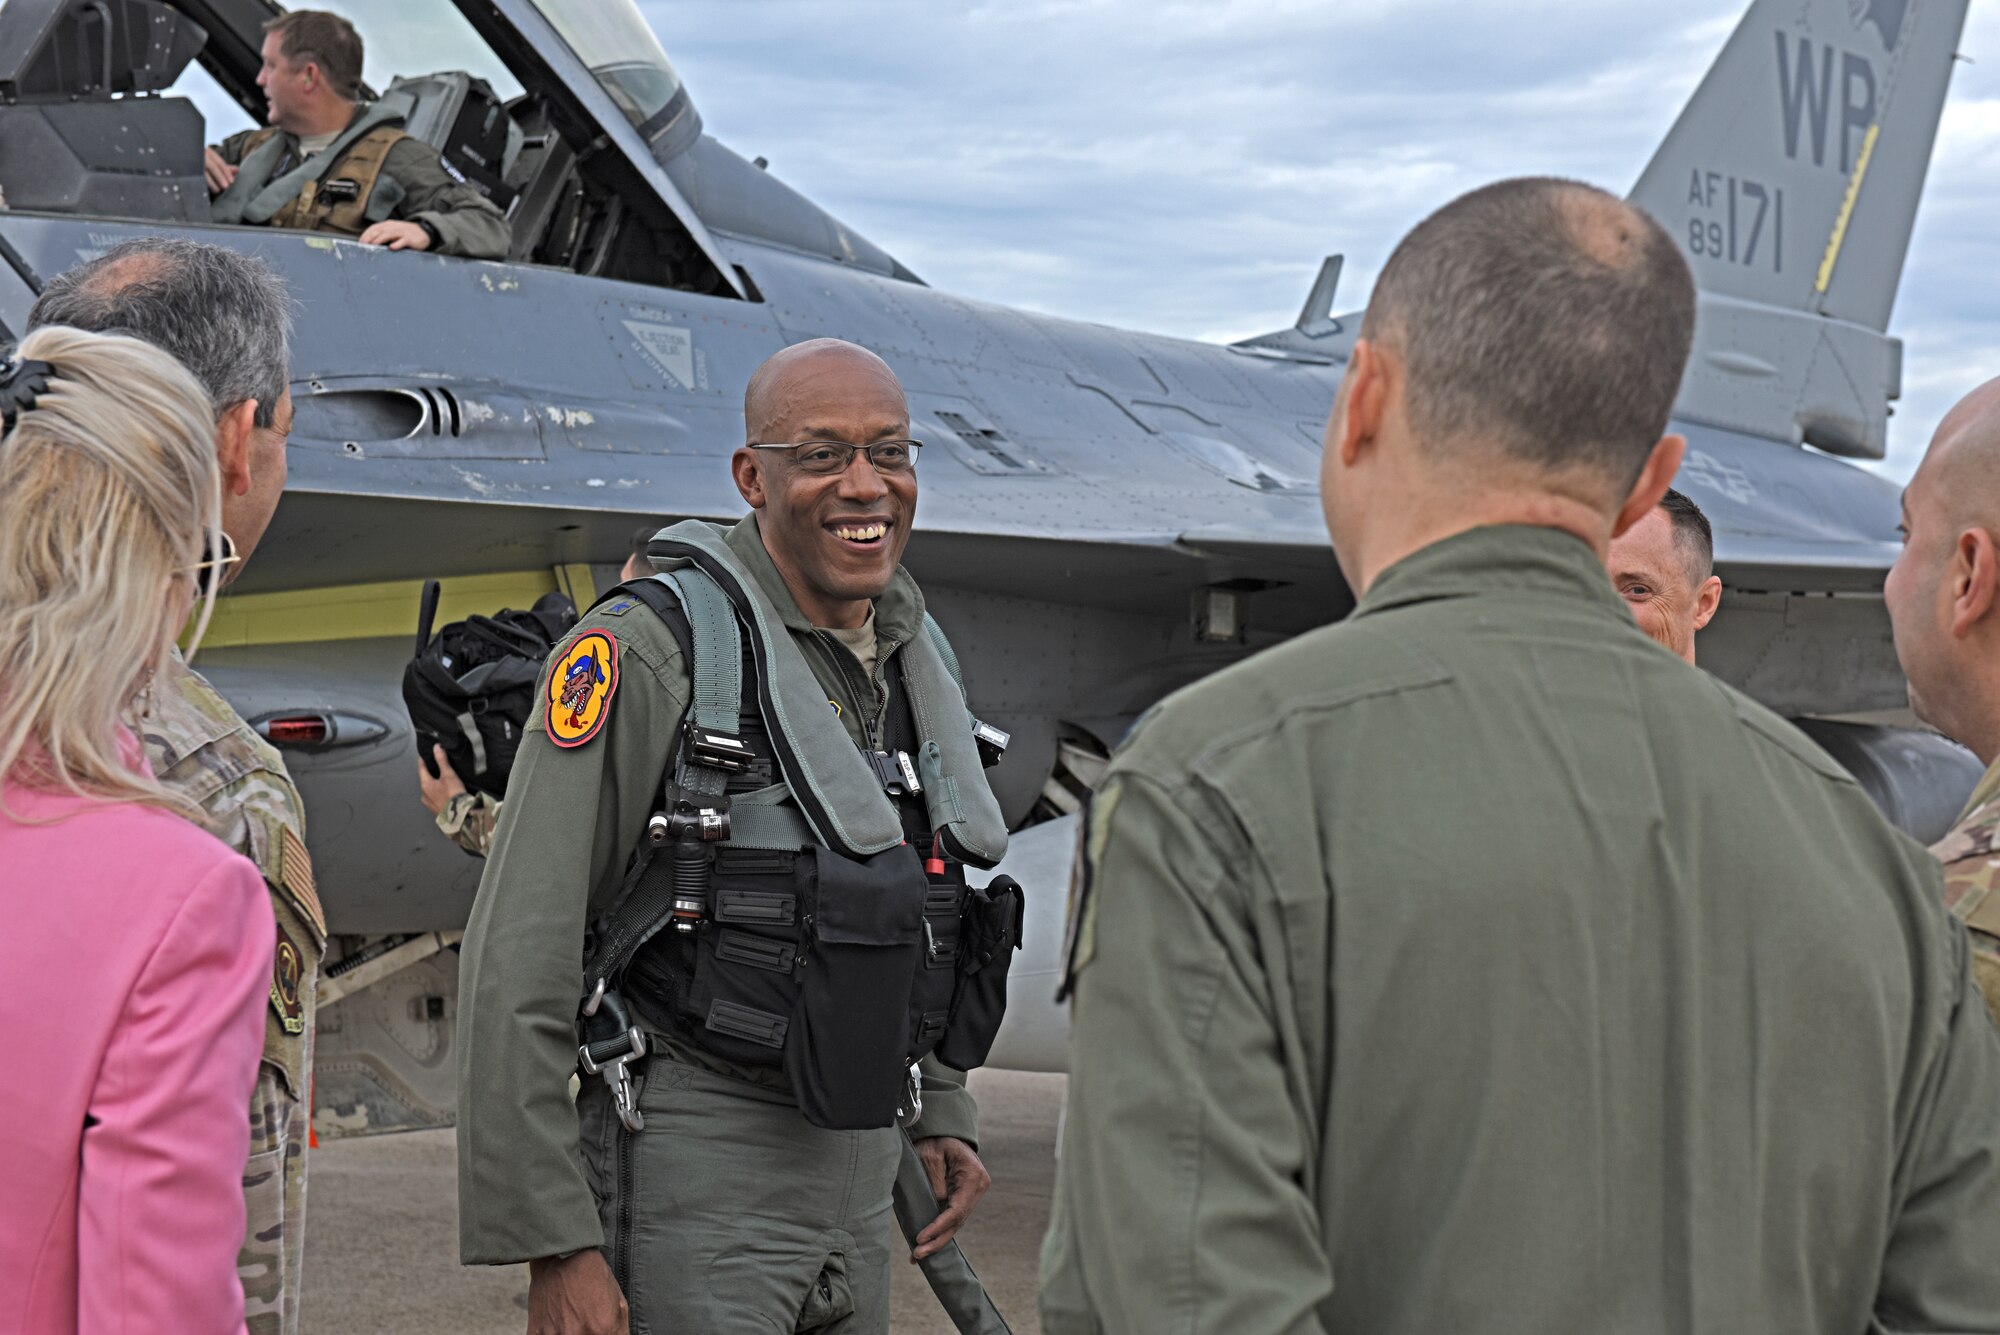 U.S. Air Force Gen. CQ Brown, Jr. Pacific Air Forces commander, is greeted by 8th Fighter Wing leaders during a visit to Kunsan Air Base, Republic of Korea, Oct. 18, 2019. During his visit, the former Wolf learned about the significant infrastructure upgrades to Kunsan, the development of the surrounding areas and emphasized the importance of U.S. Indo-Pacific Command. (U.S. Air Force photo by Staff Sgt. Mackenzie Mendez)